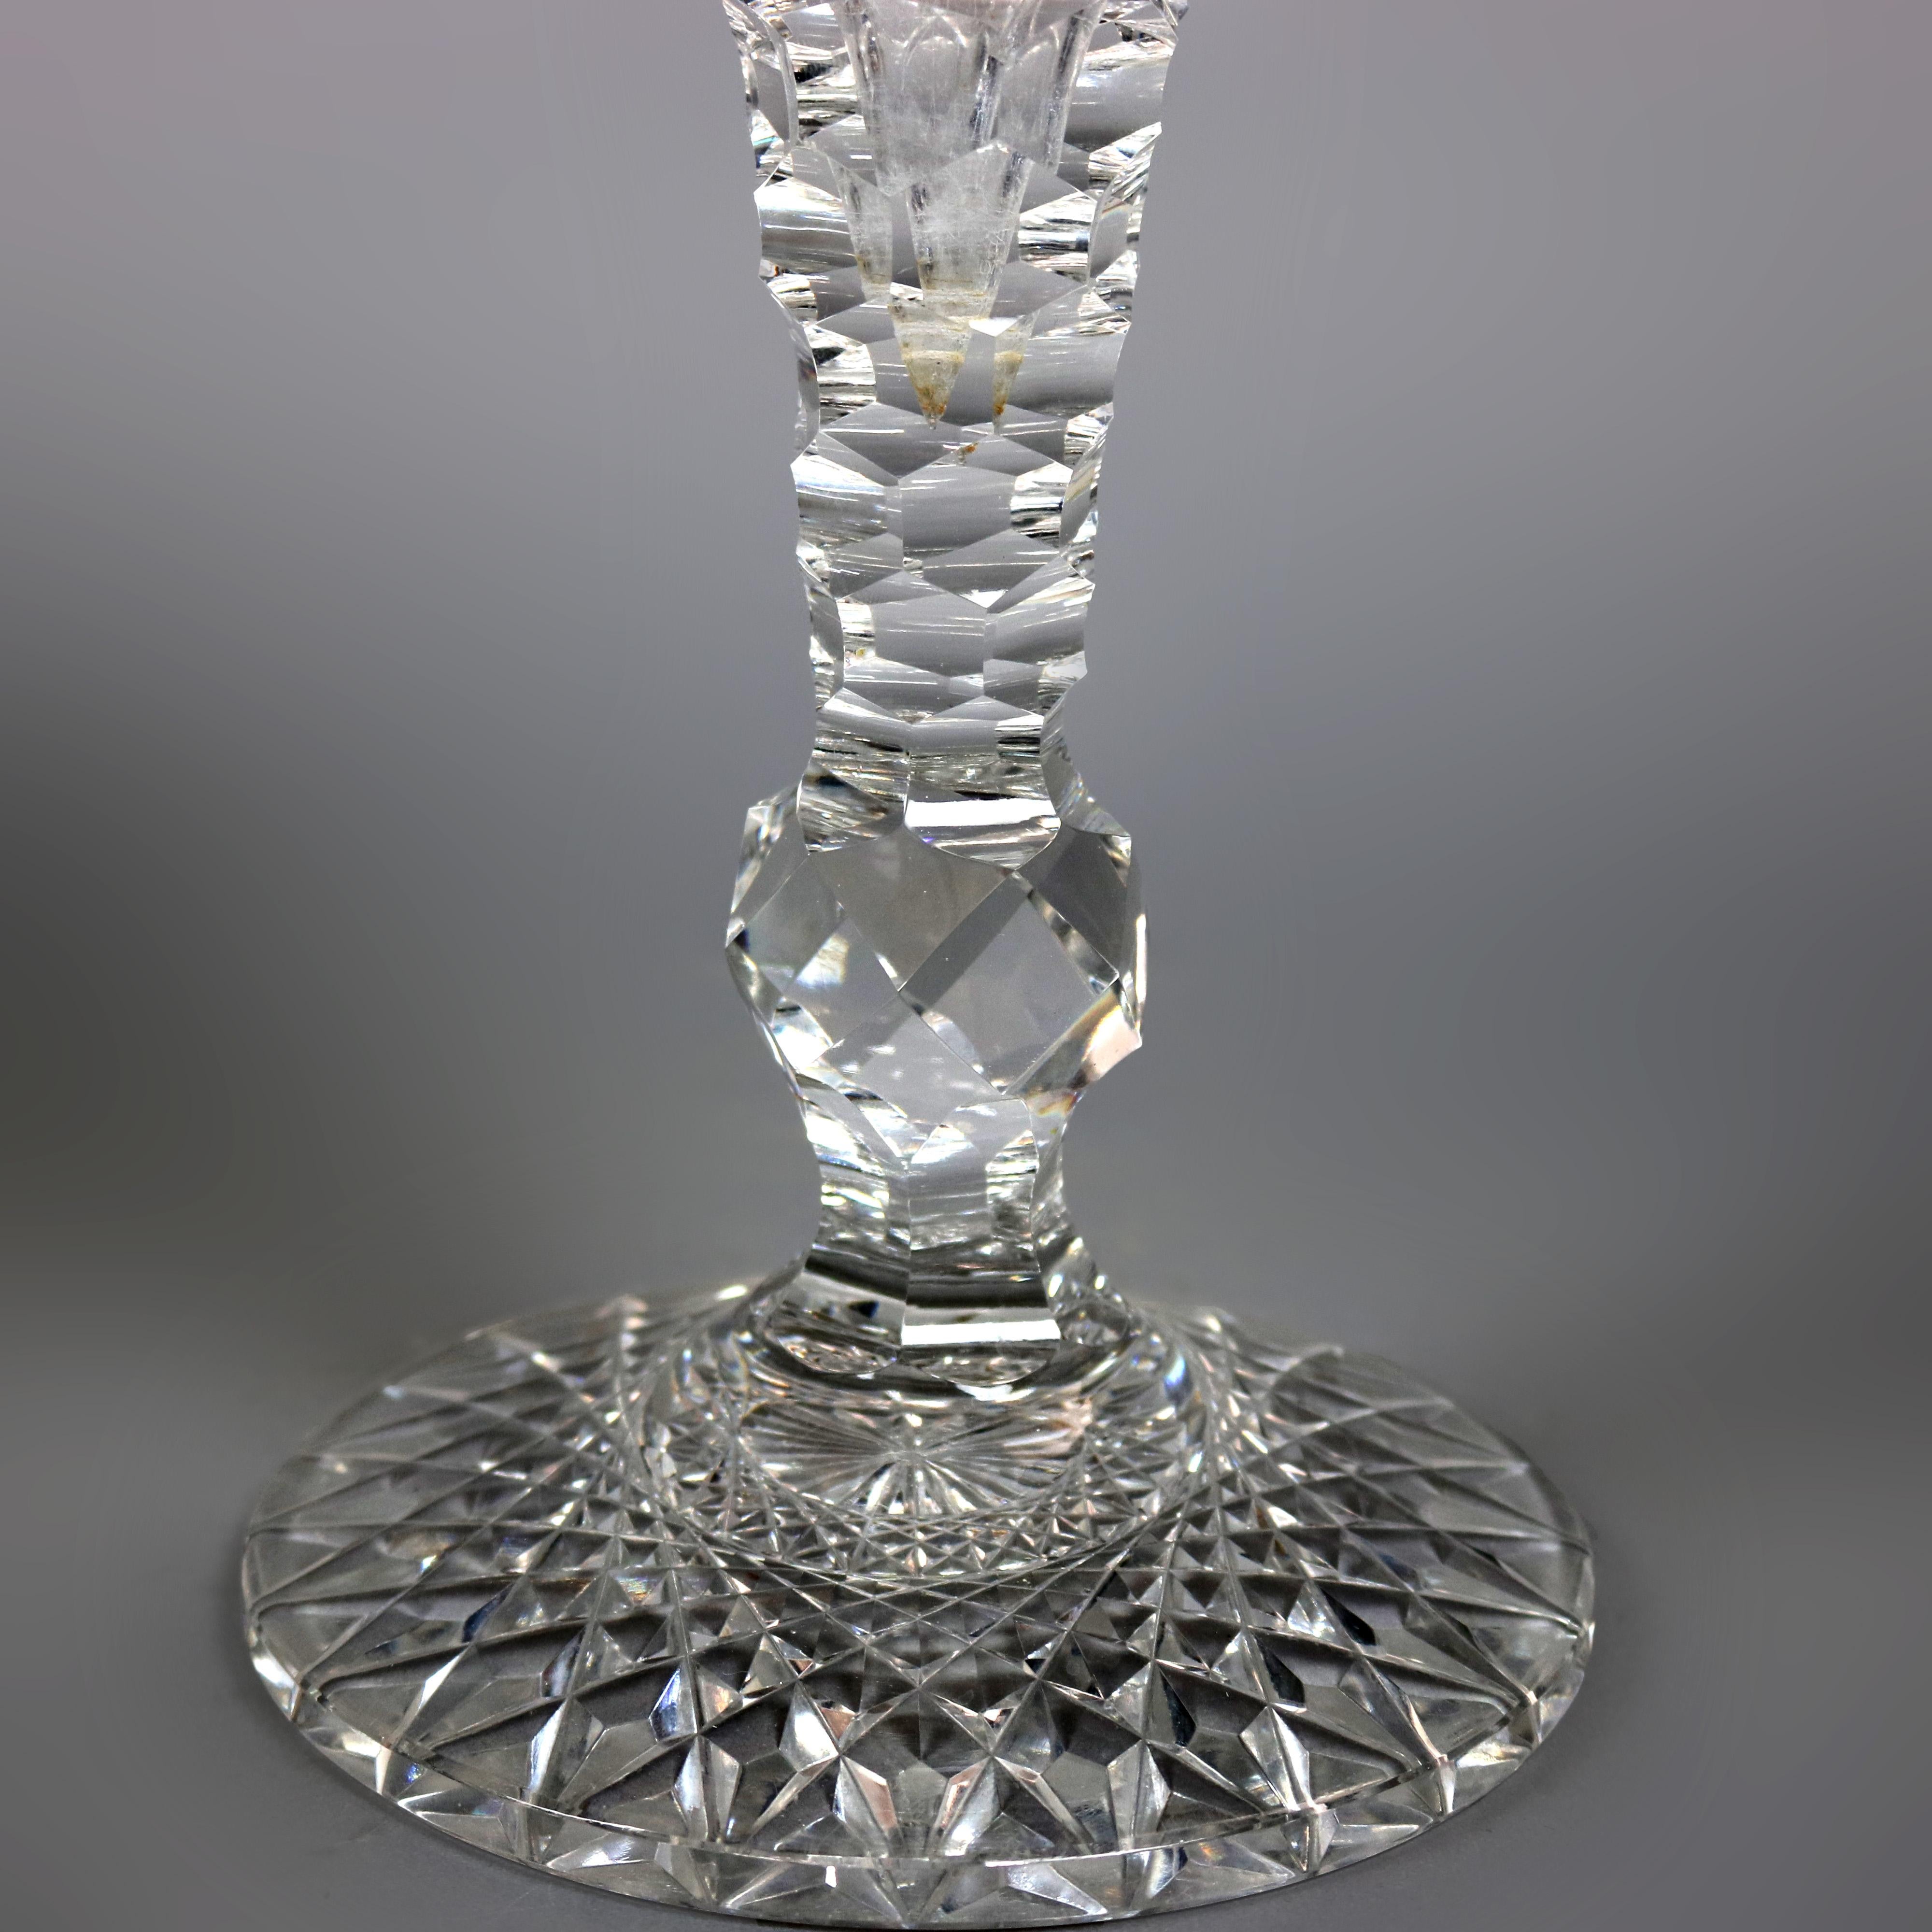 Crystal Antique Large Hawkes Cut Glass Footed Trumpet Vase, circa 1900